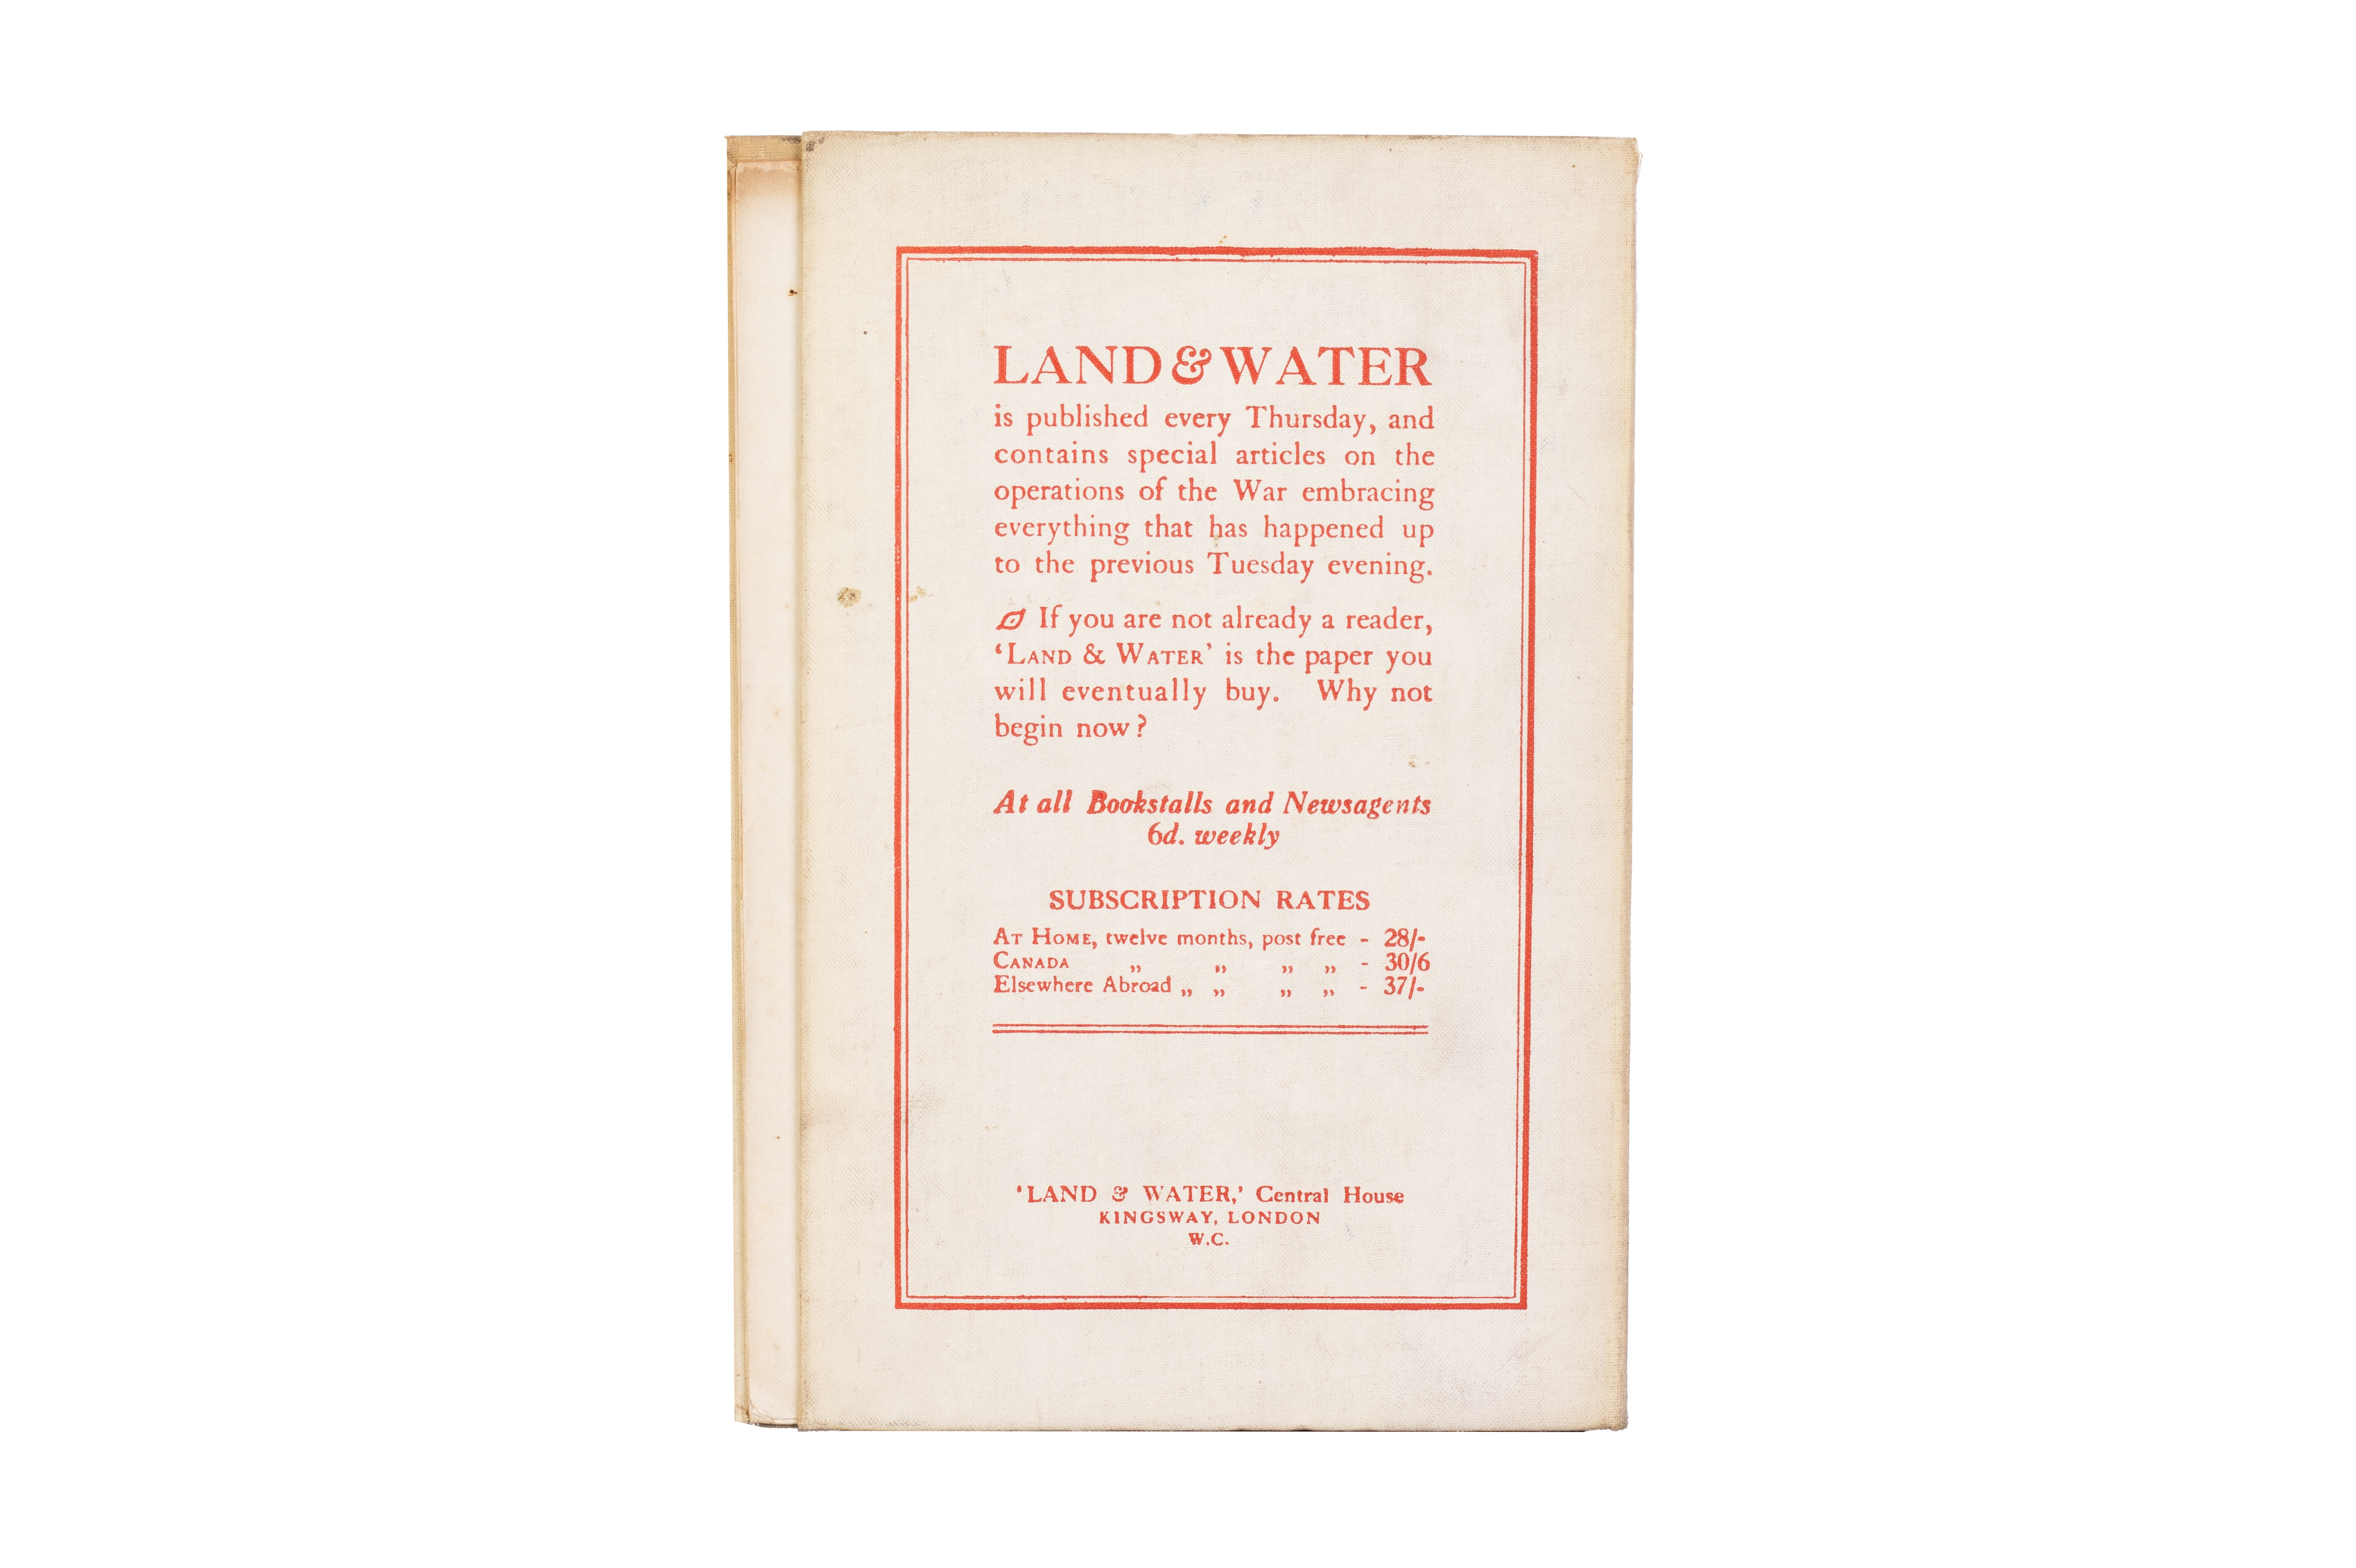 THE LAND & WATER MAP OF THE WAR (1915) - Image 9 of 10